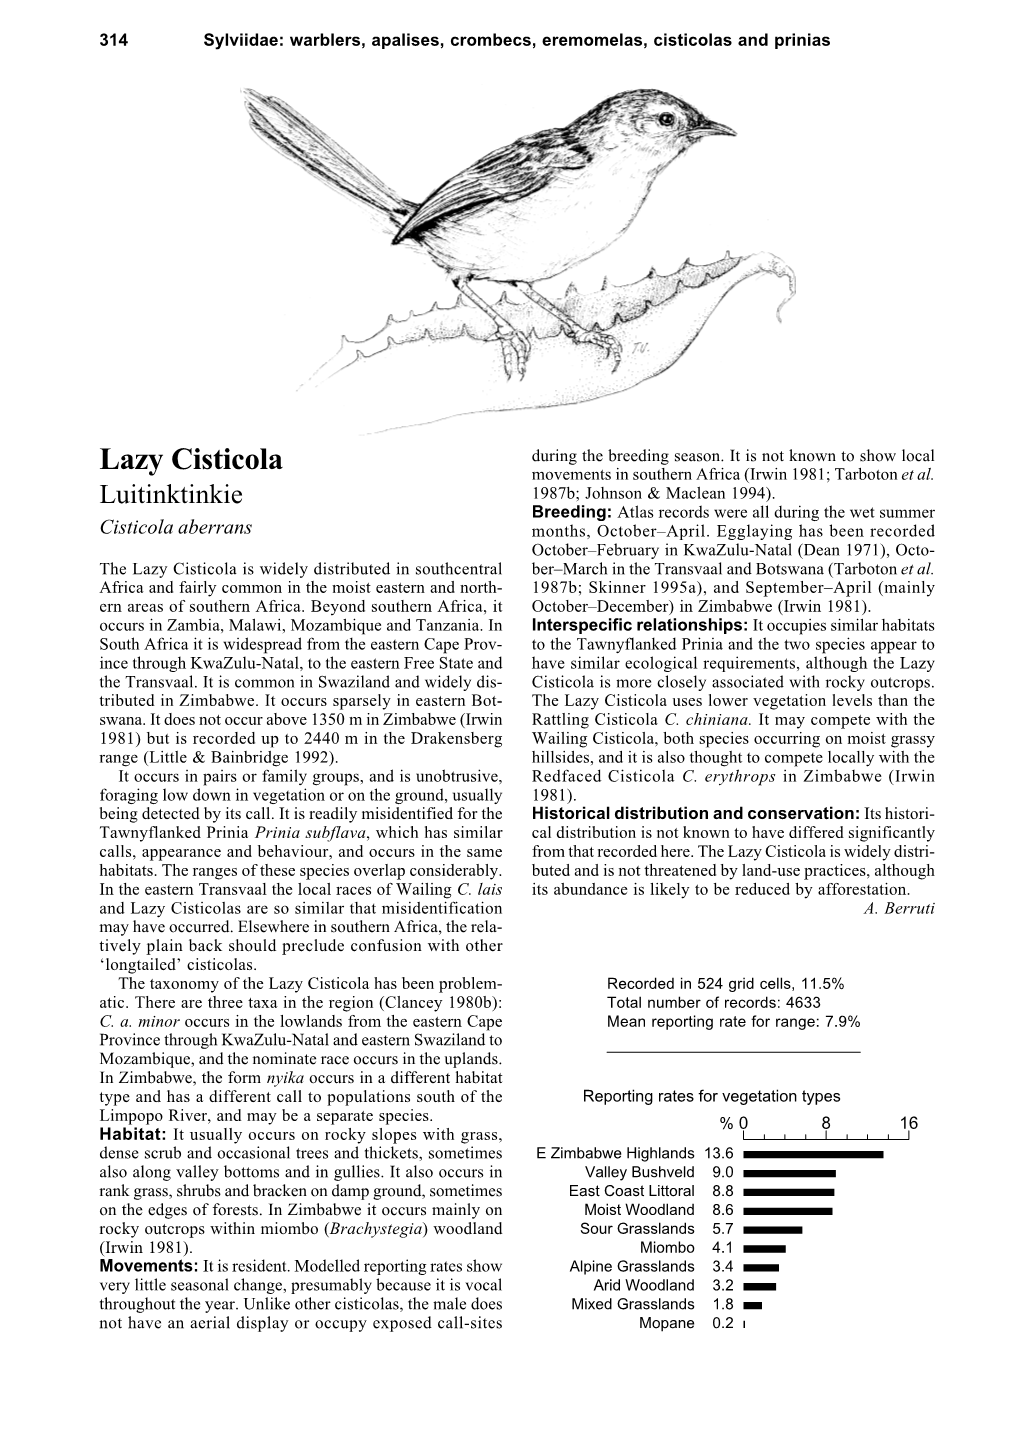 Lazy Cisticola Movements in Southern Africa (Irwin 1981; Tarboton Et Al